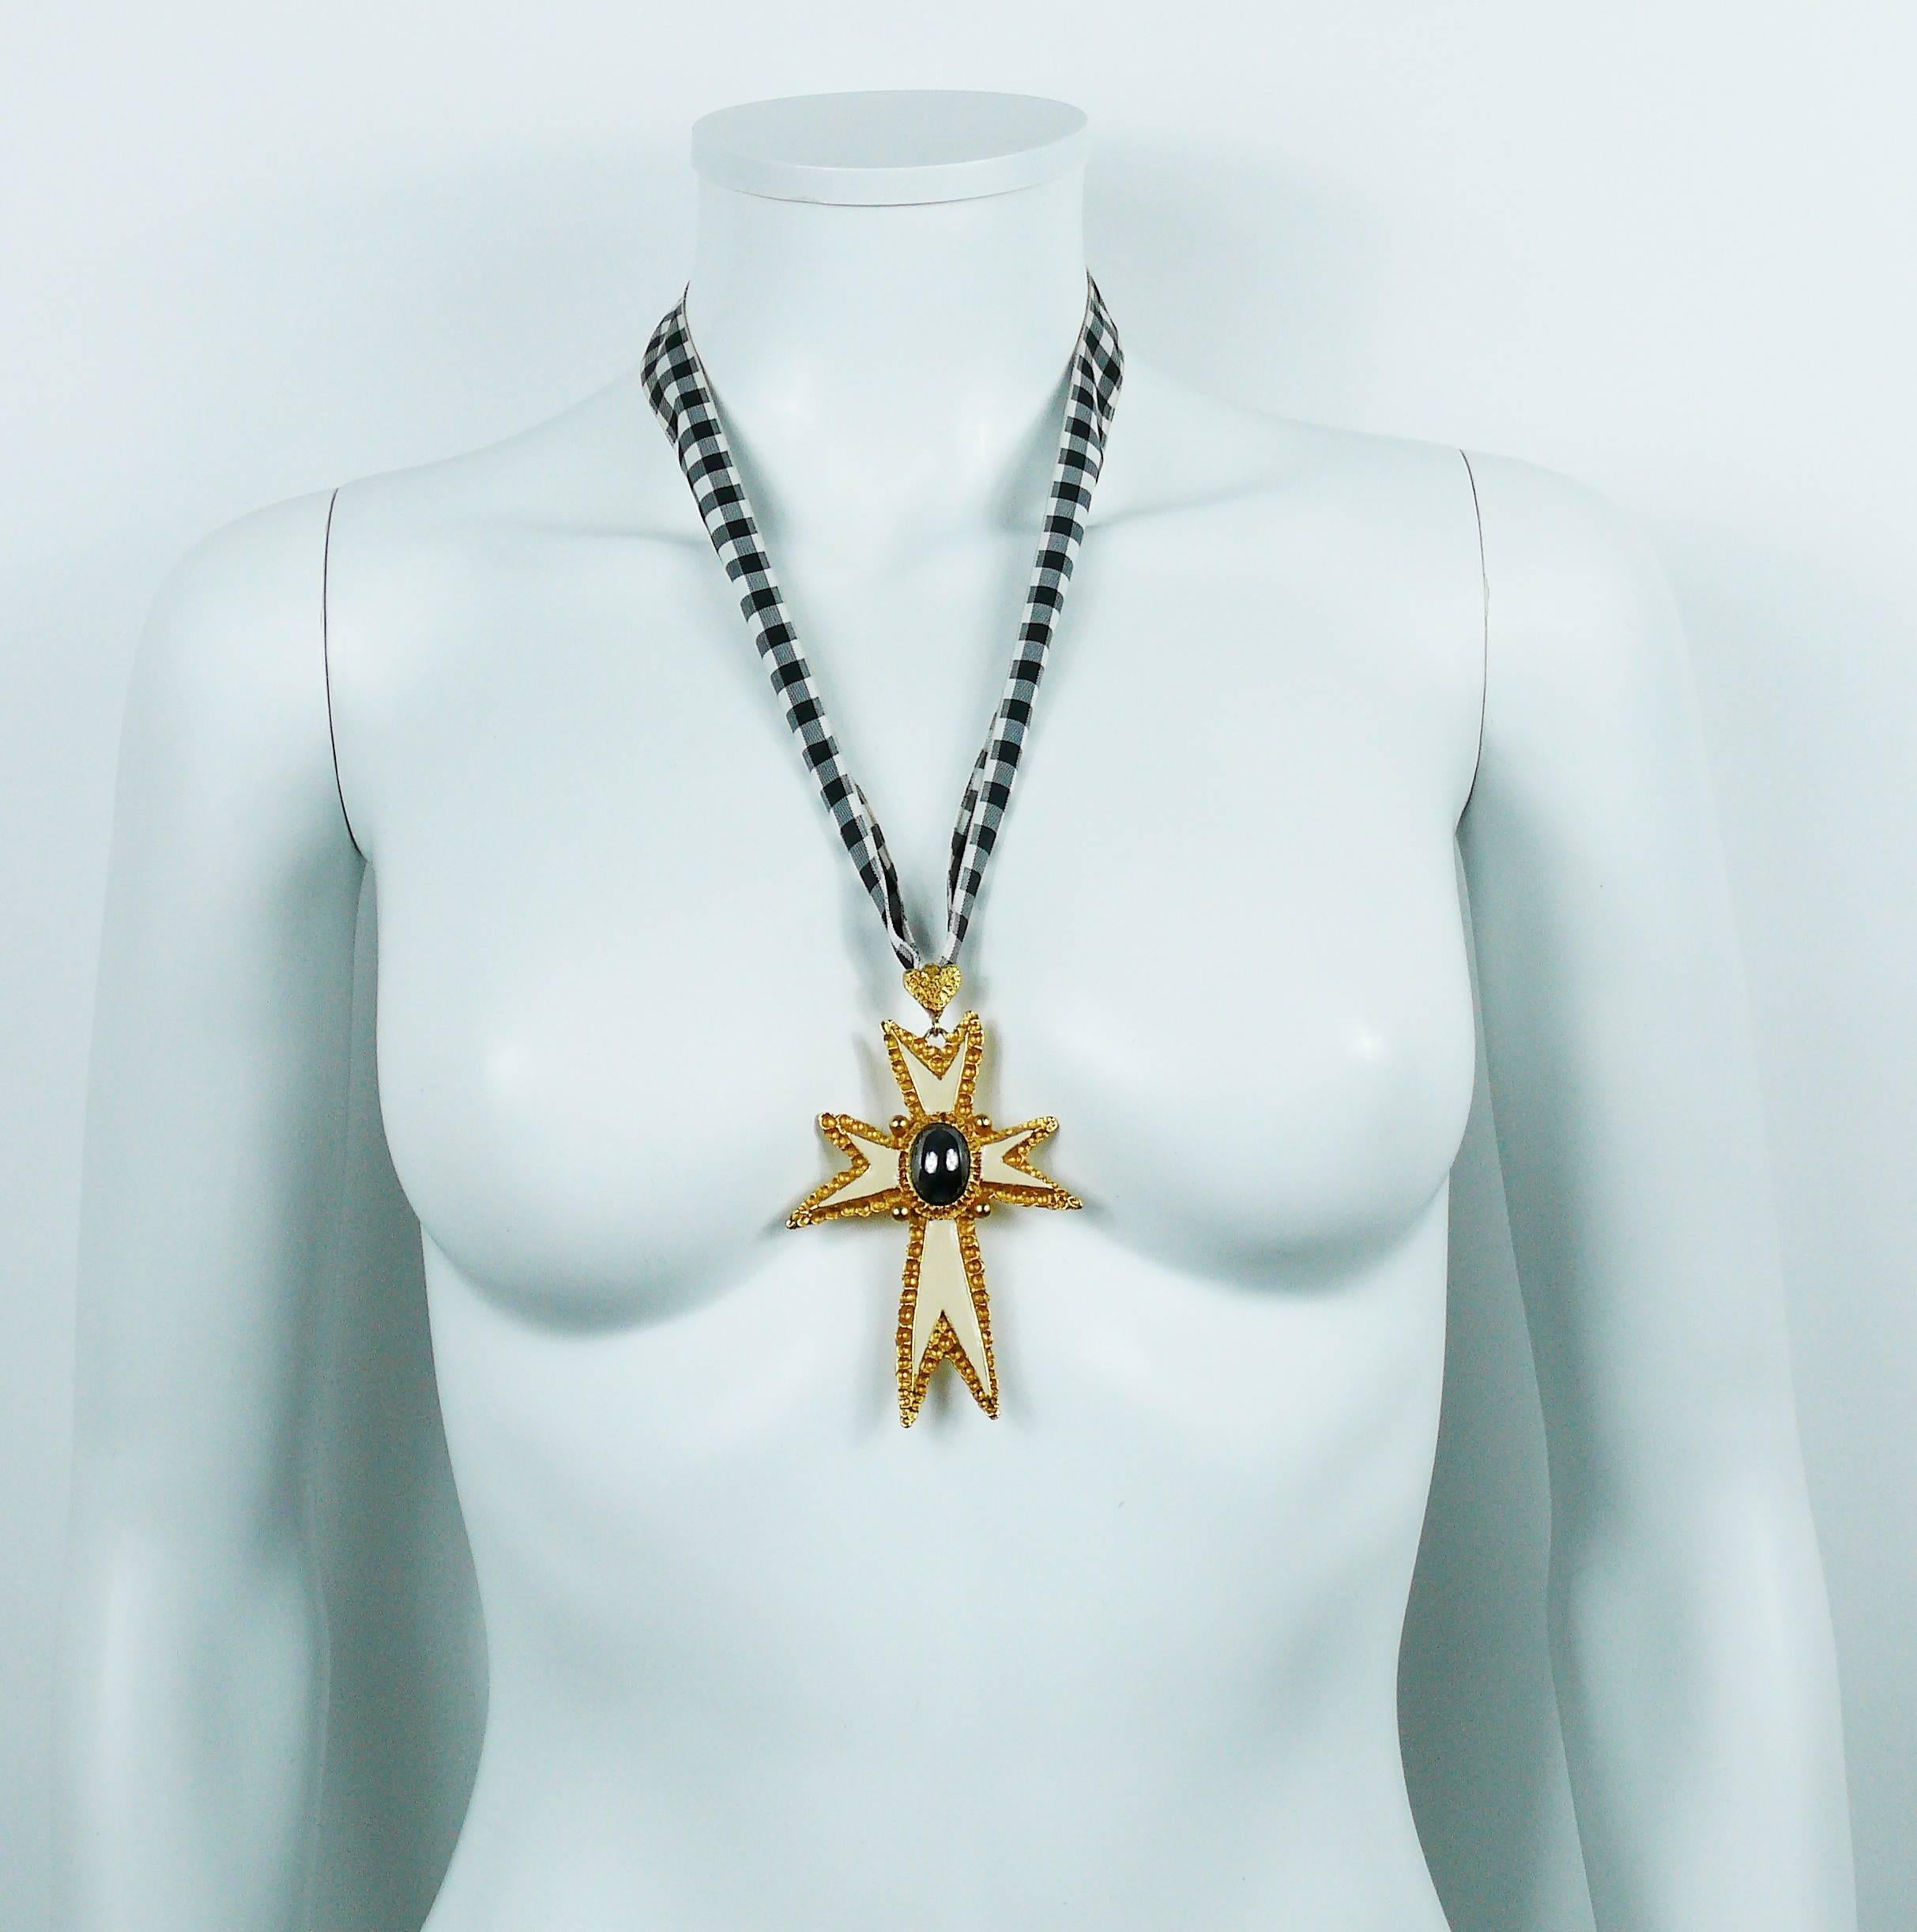 CHRISTIAN LACROIX vintage 1994 pendant necklace featuring a gold tone enameled cross with hematite cabochon embellishement.

Original checkered ribbon.

Marked CHRISTIAN LACROIX E94 Made in France.

Indicative measurements : length worn approx. 33